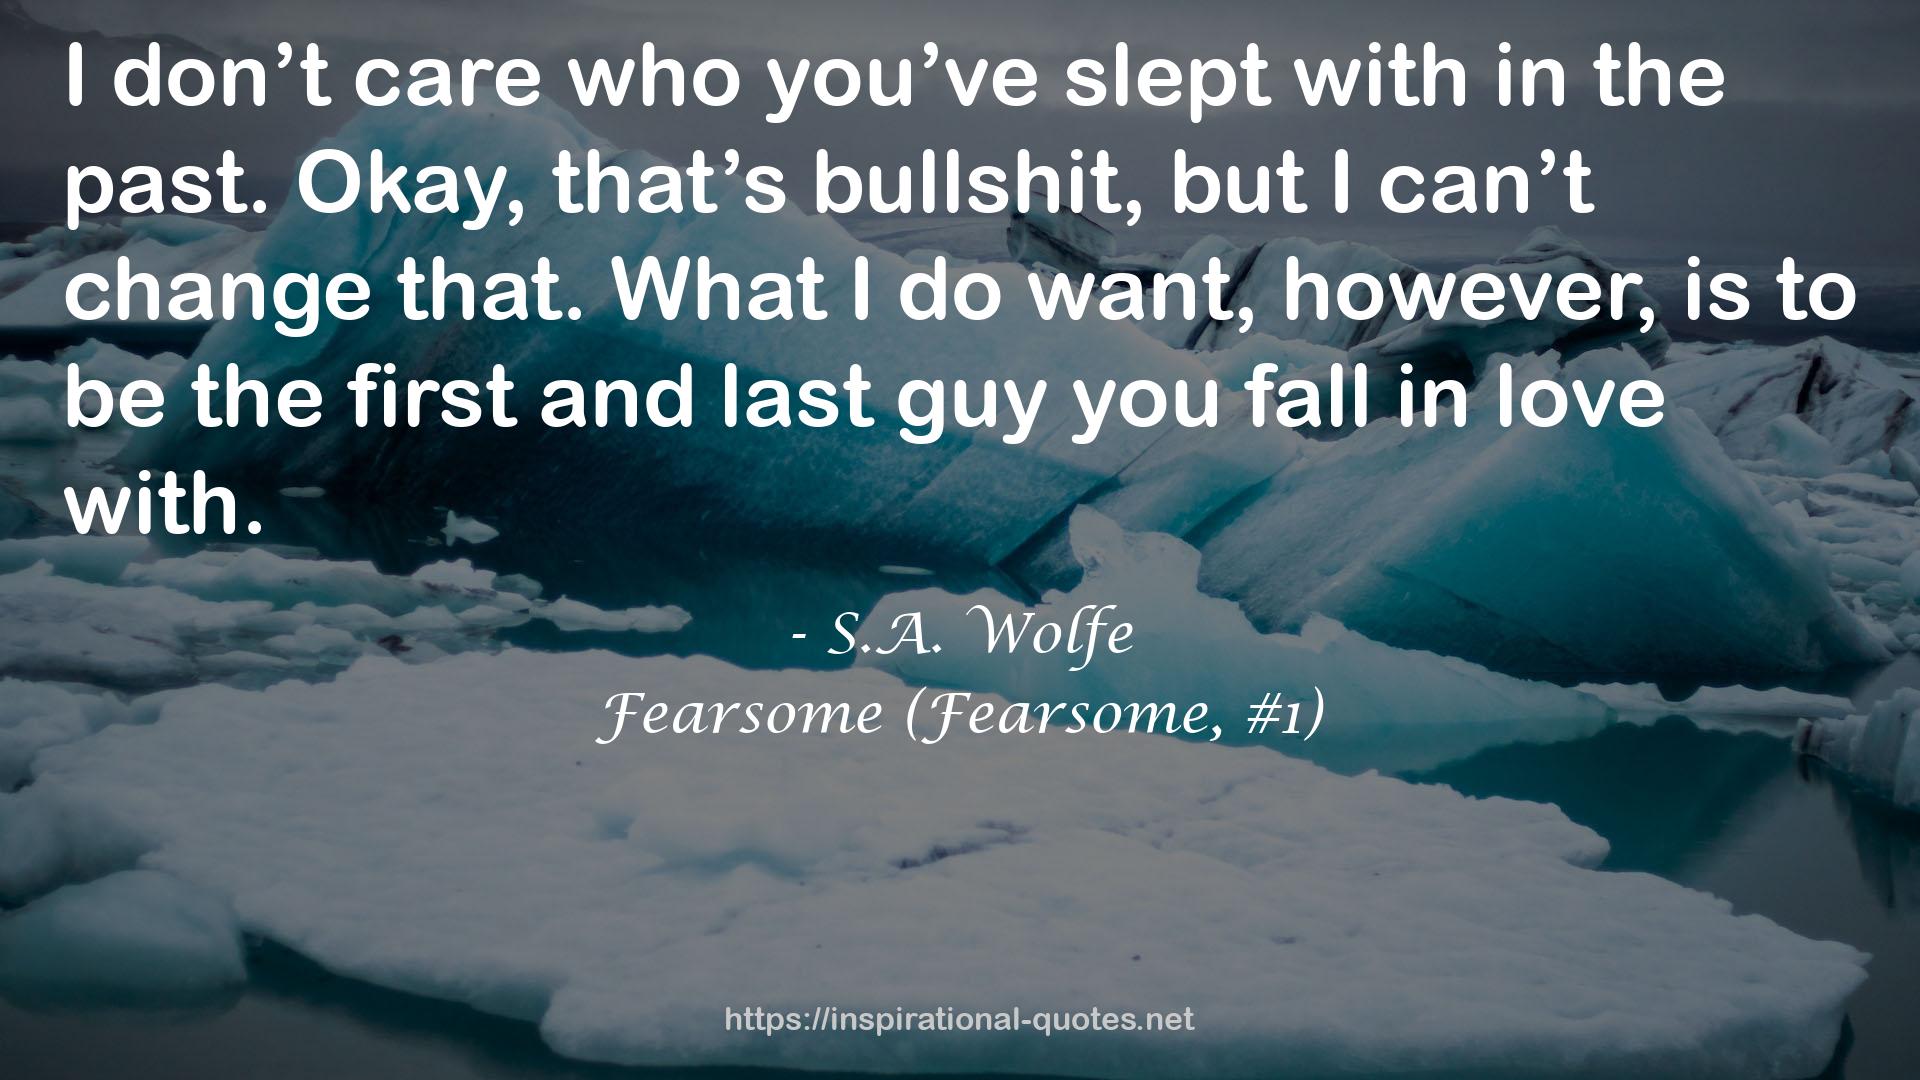 Fearsome (Fearsome, #1) QUOTES